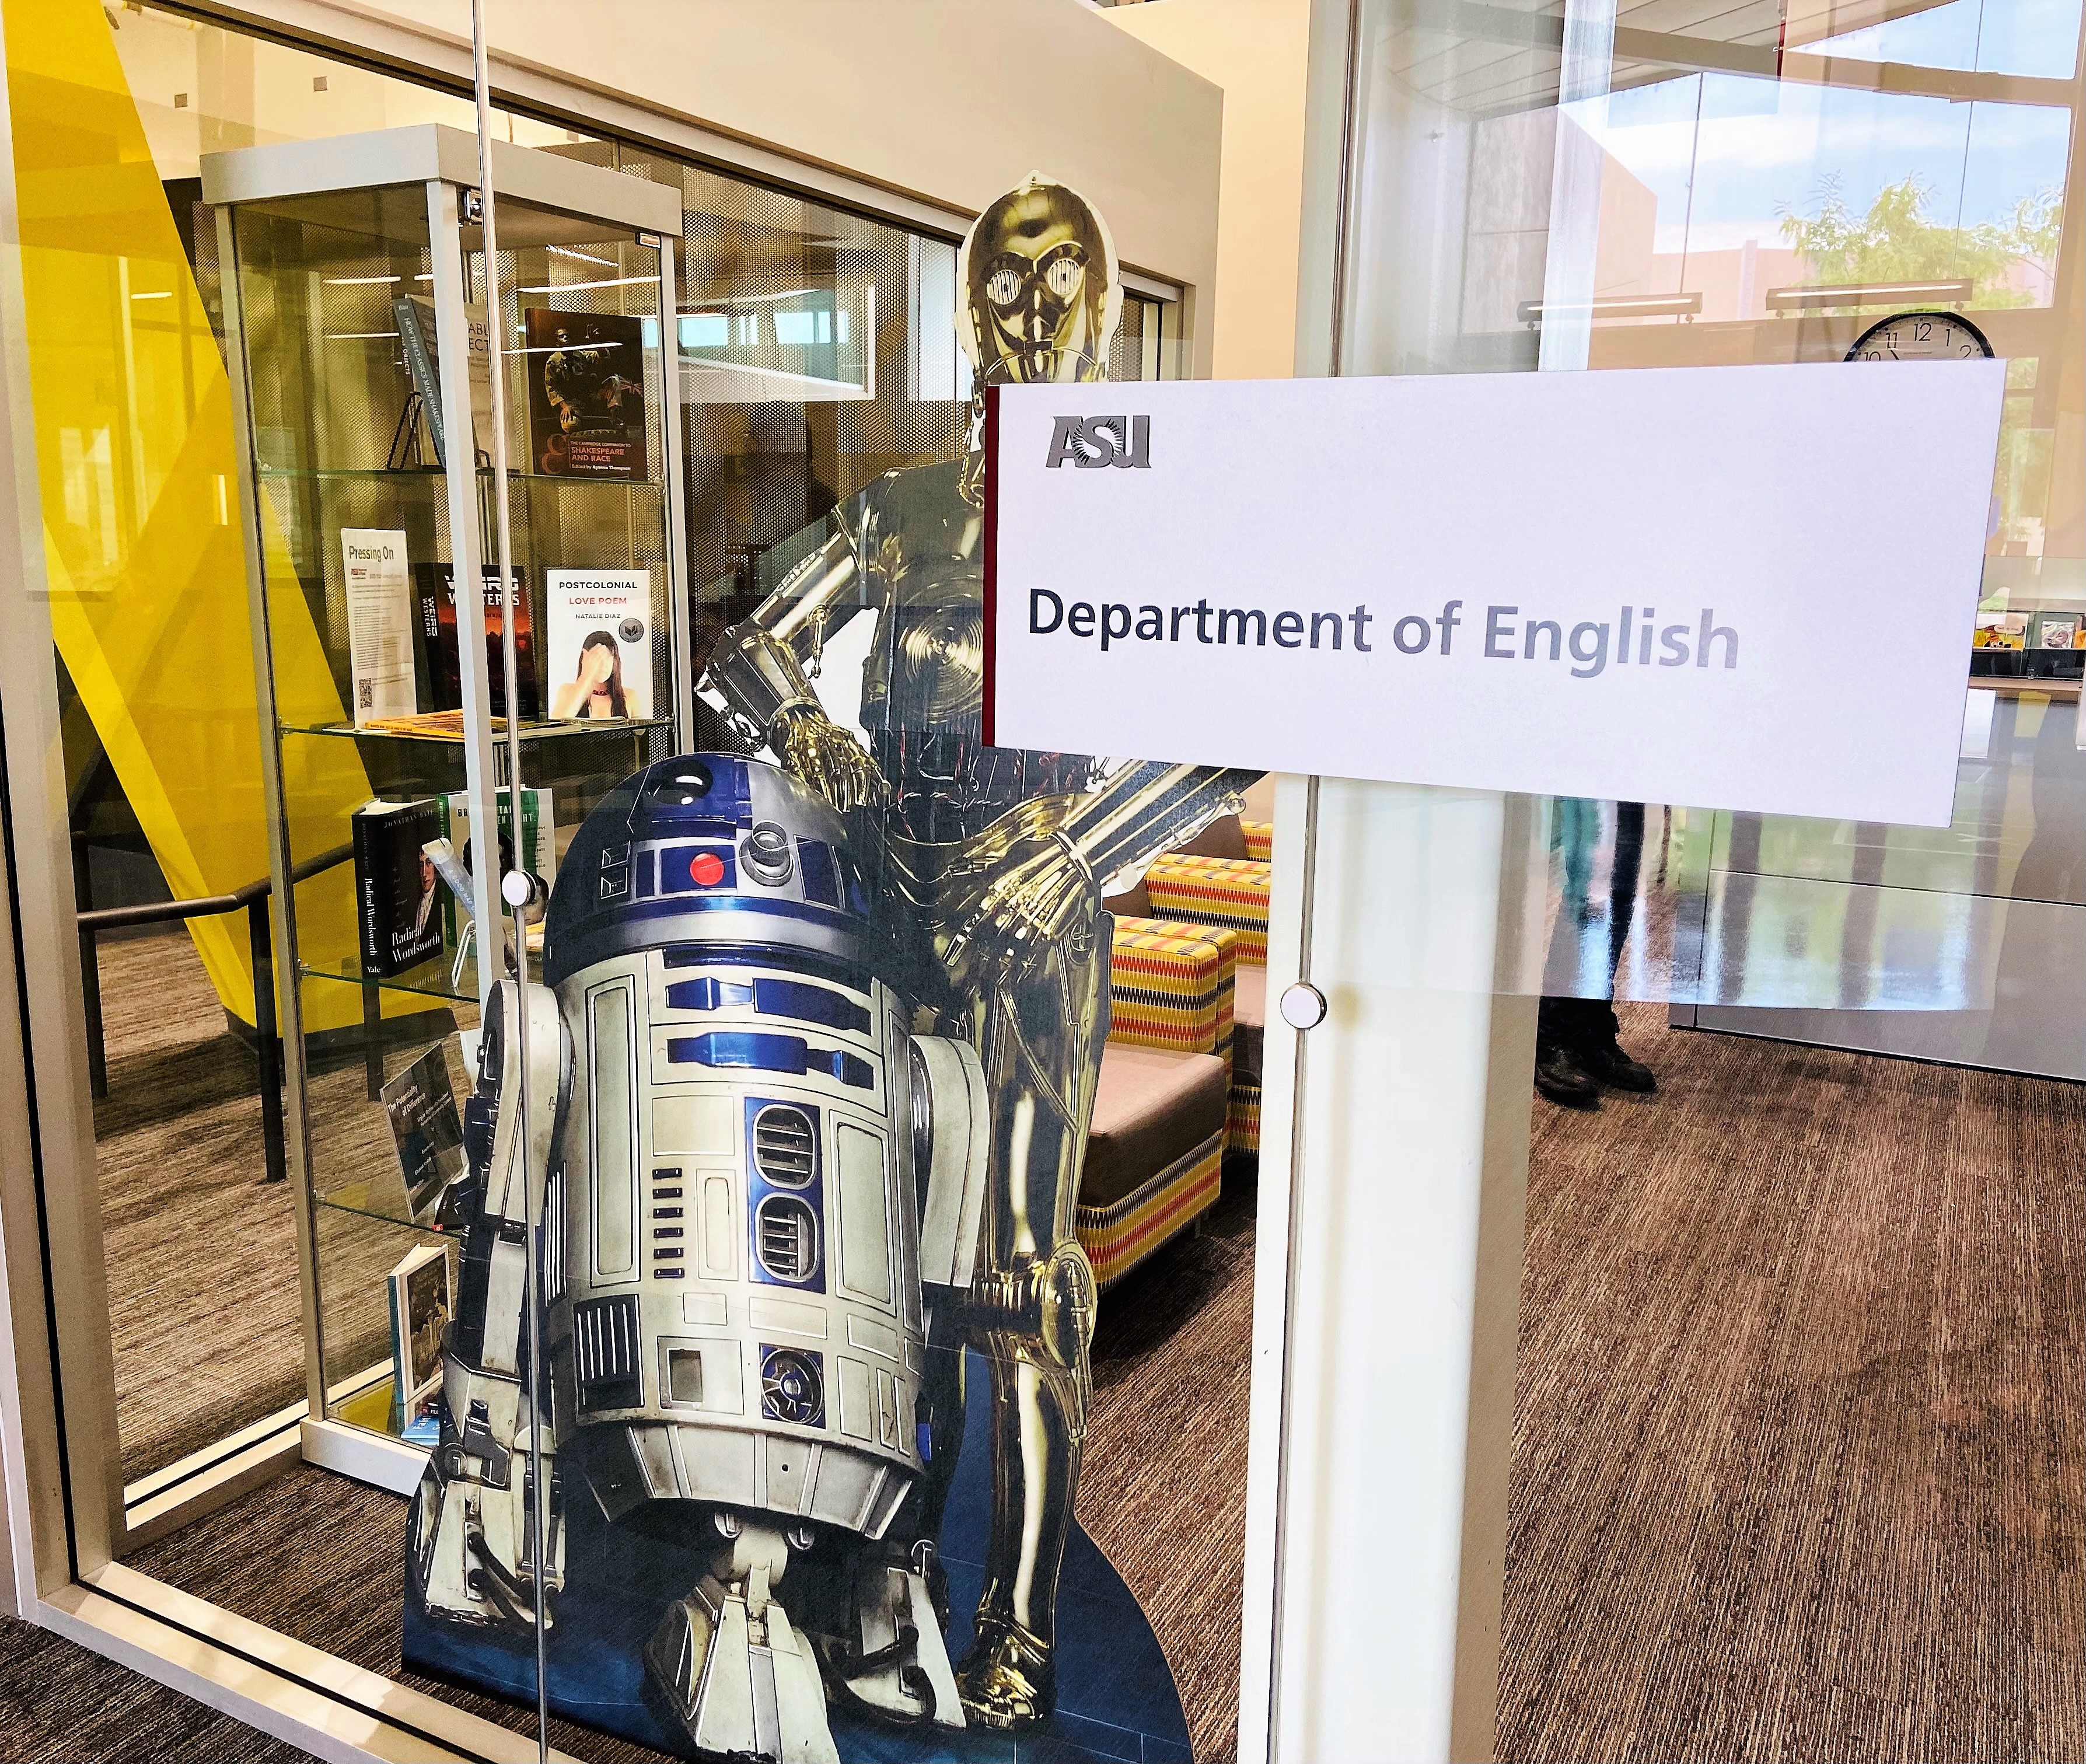 Droids from "Star Wars" greet visitors to the ASU English main office / Photo by Kristen LaRue-Sandler